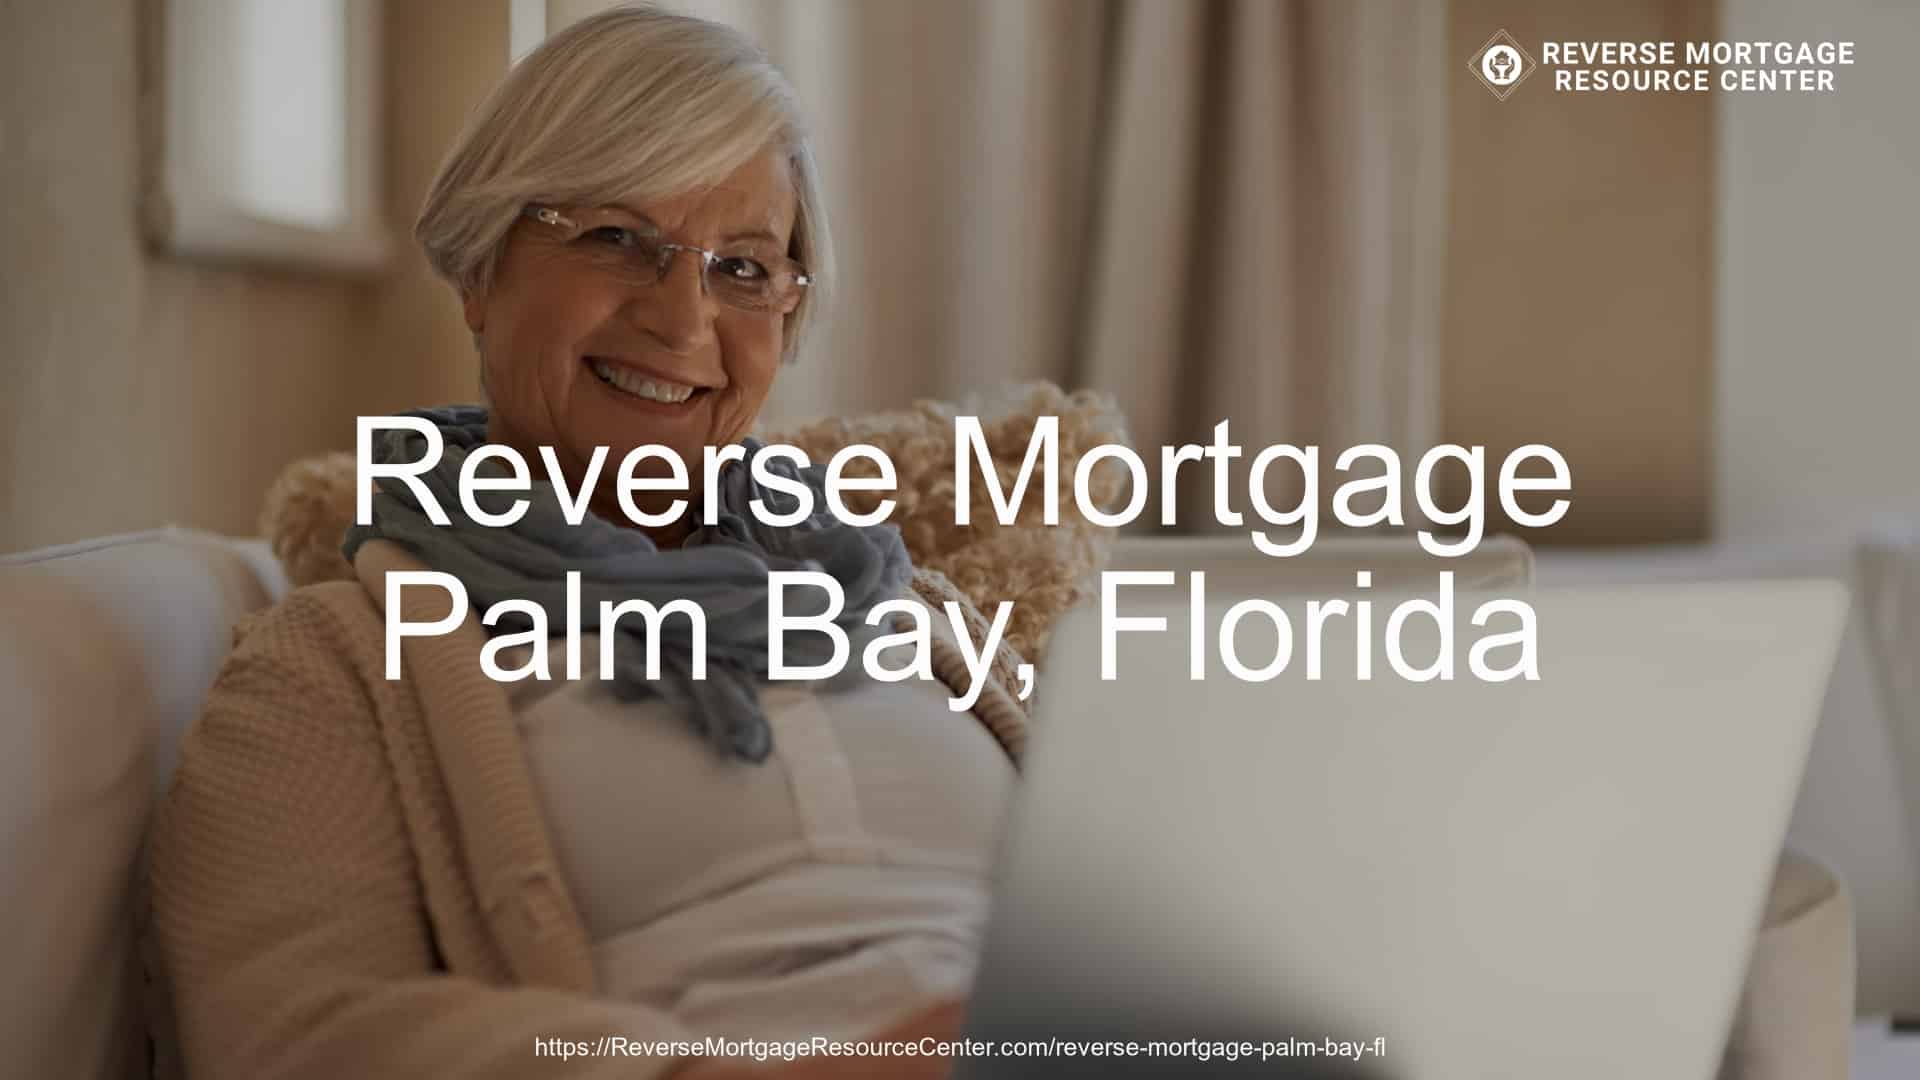 Reverse Mortgage in Palm Bay, FL